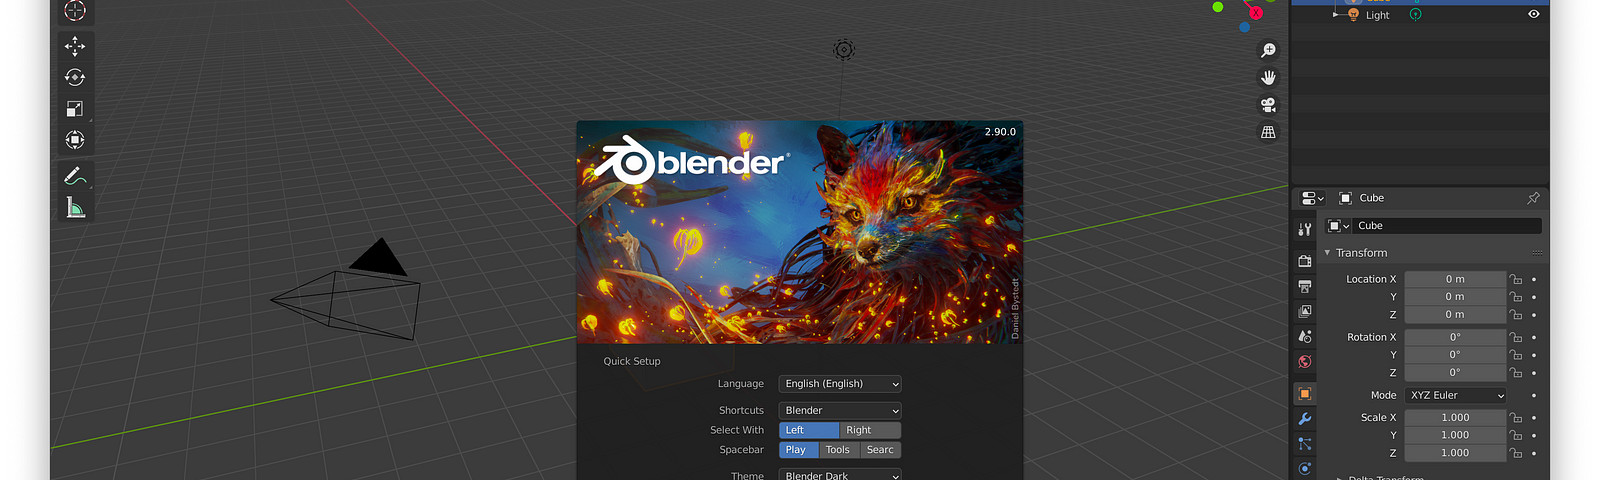 A screenshot of the startup screen of a newly installed Blender programme version 2.90.0